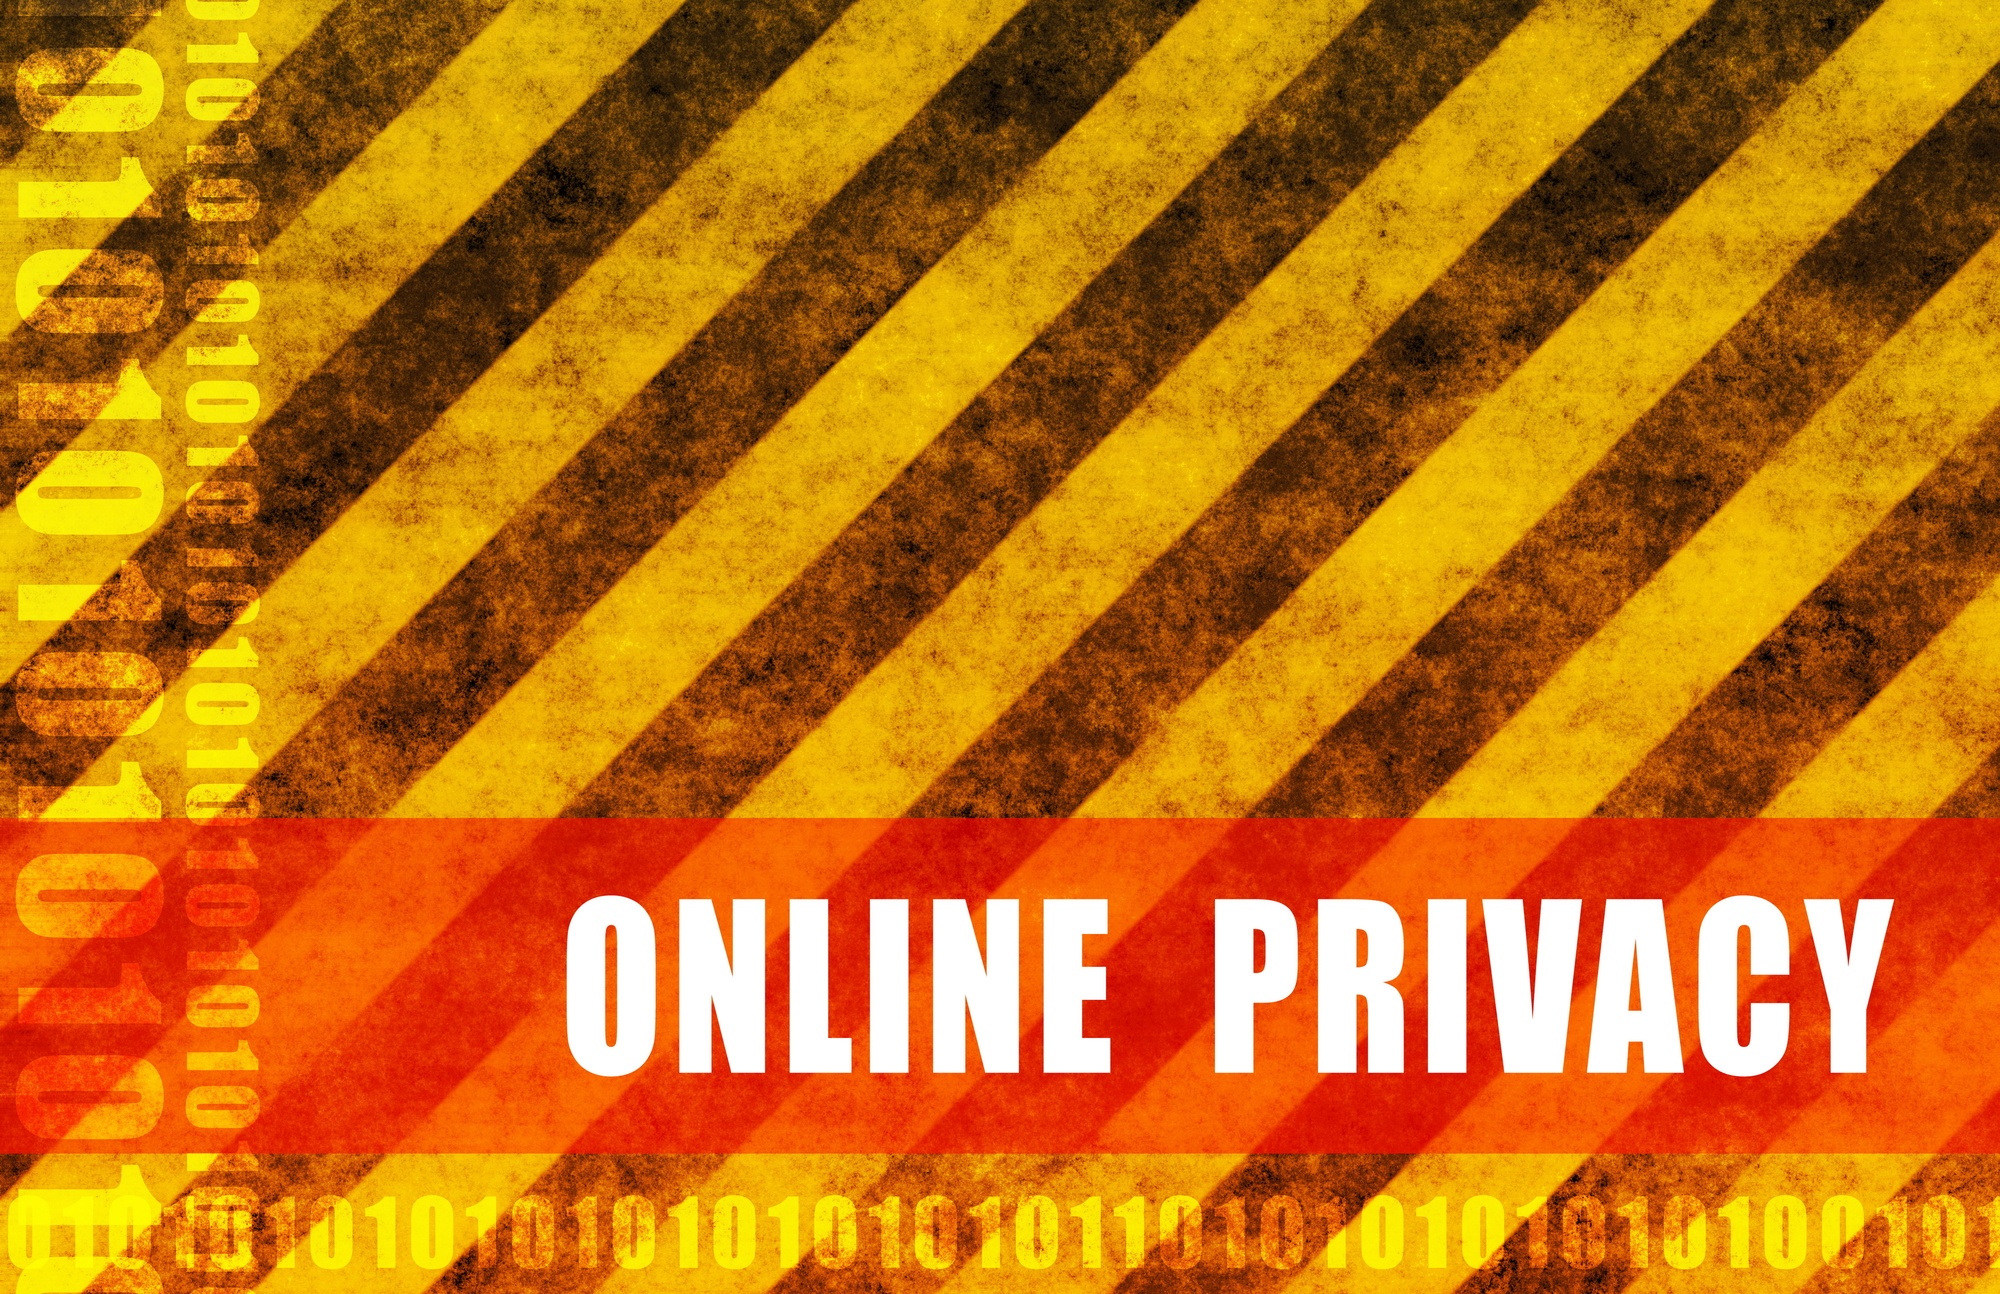 password policies as part of protecting online privacy